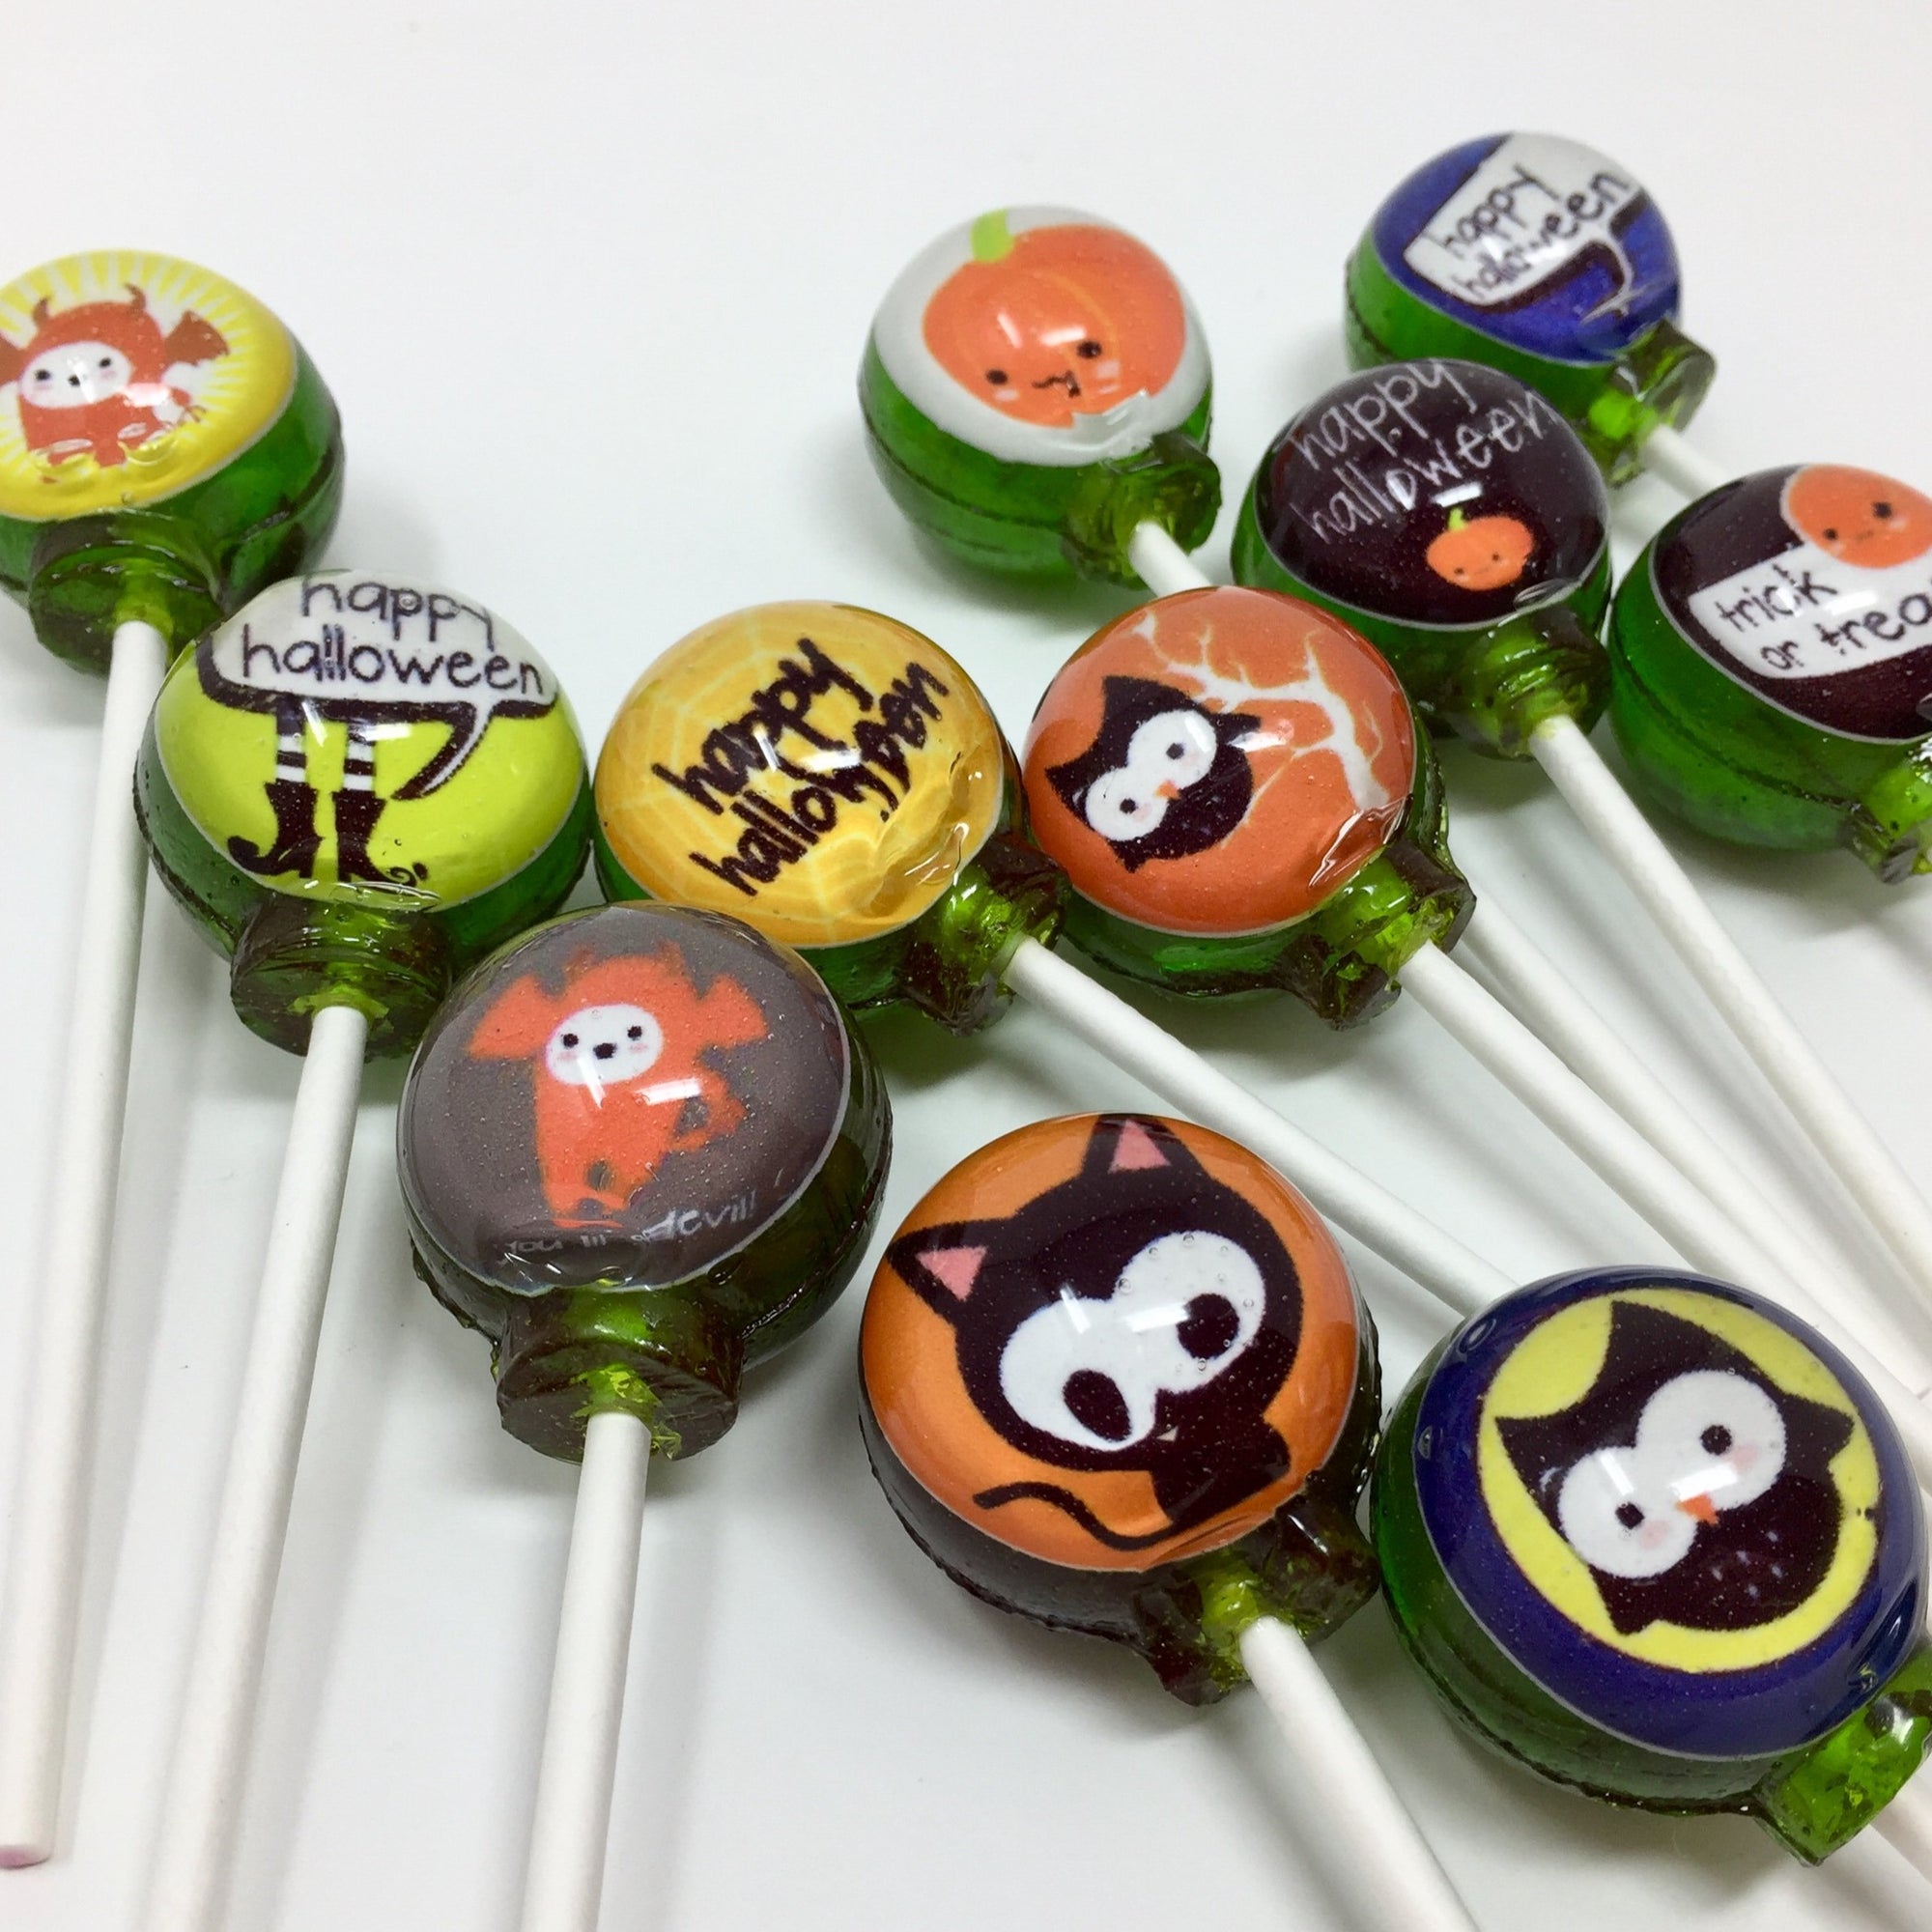 Cute Halloween Critter Boop Lollipops 6-piece set by I Want Candy!